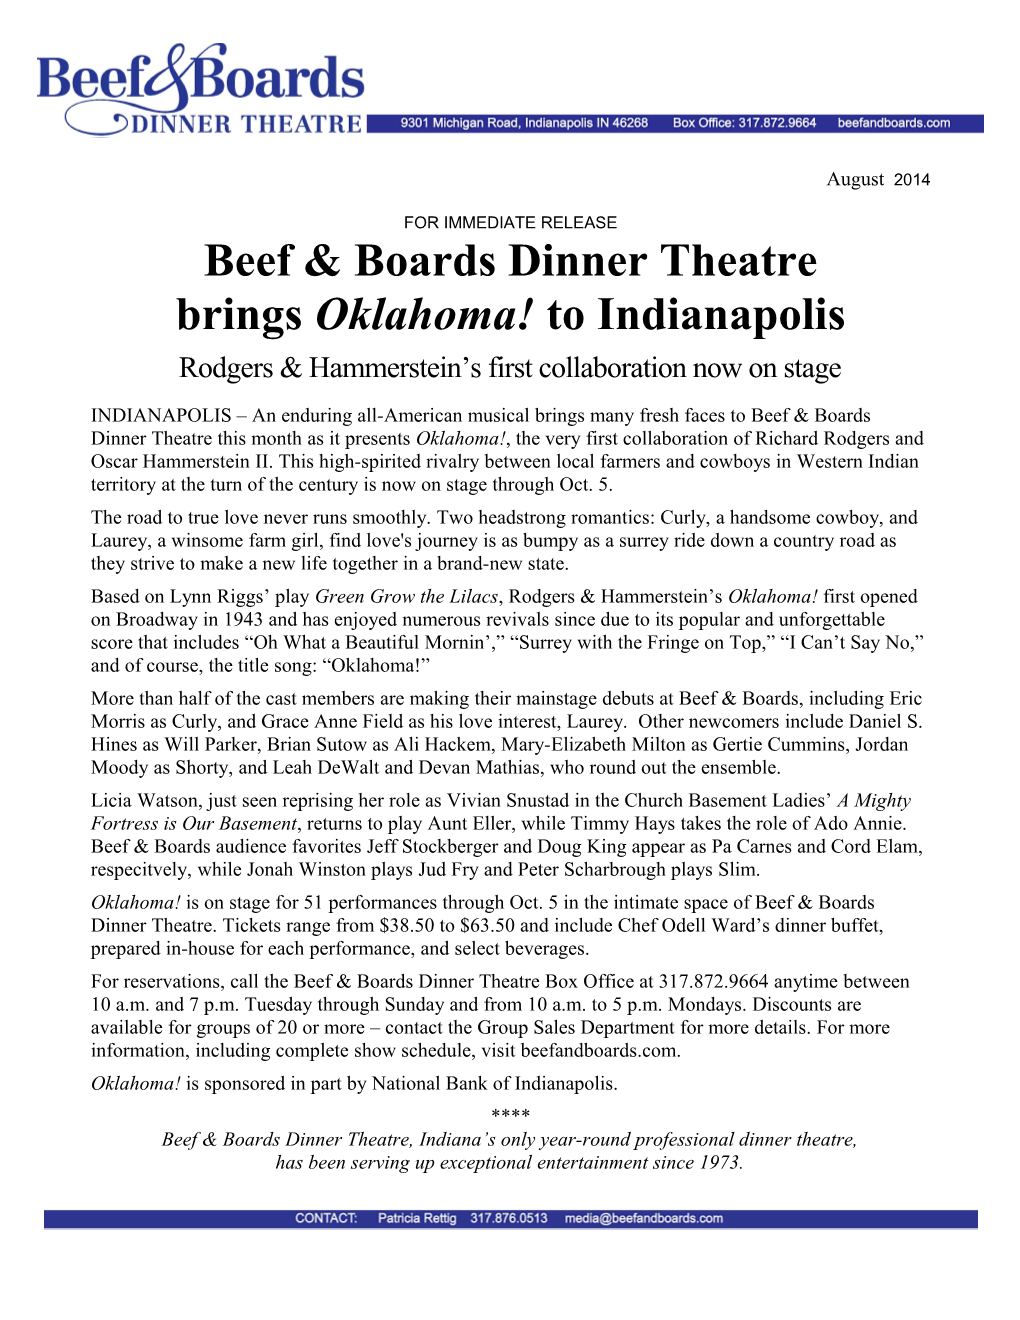 Beef & Boards Dinner Theatre Brings Oklahoma! to Indianapolis